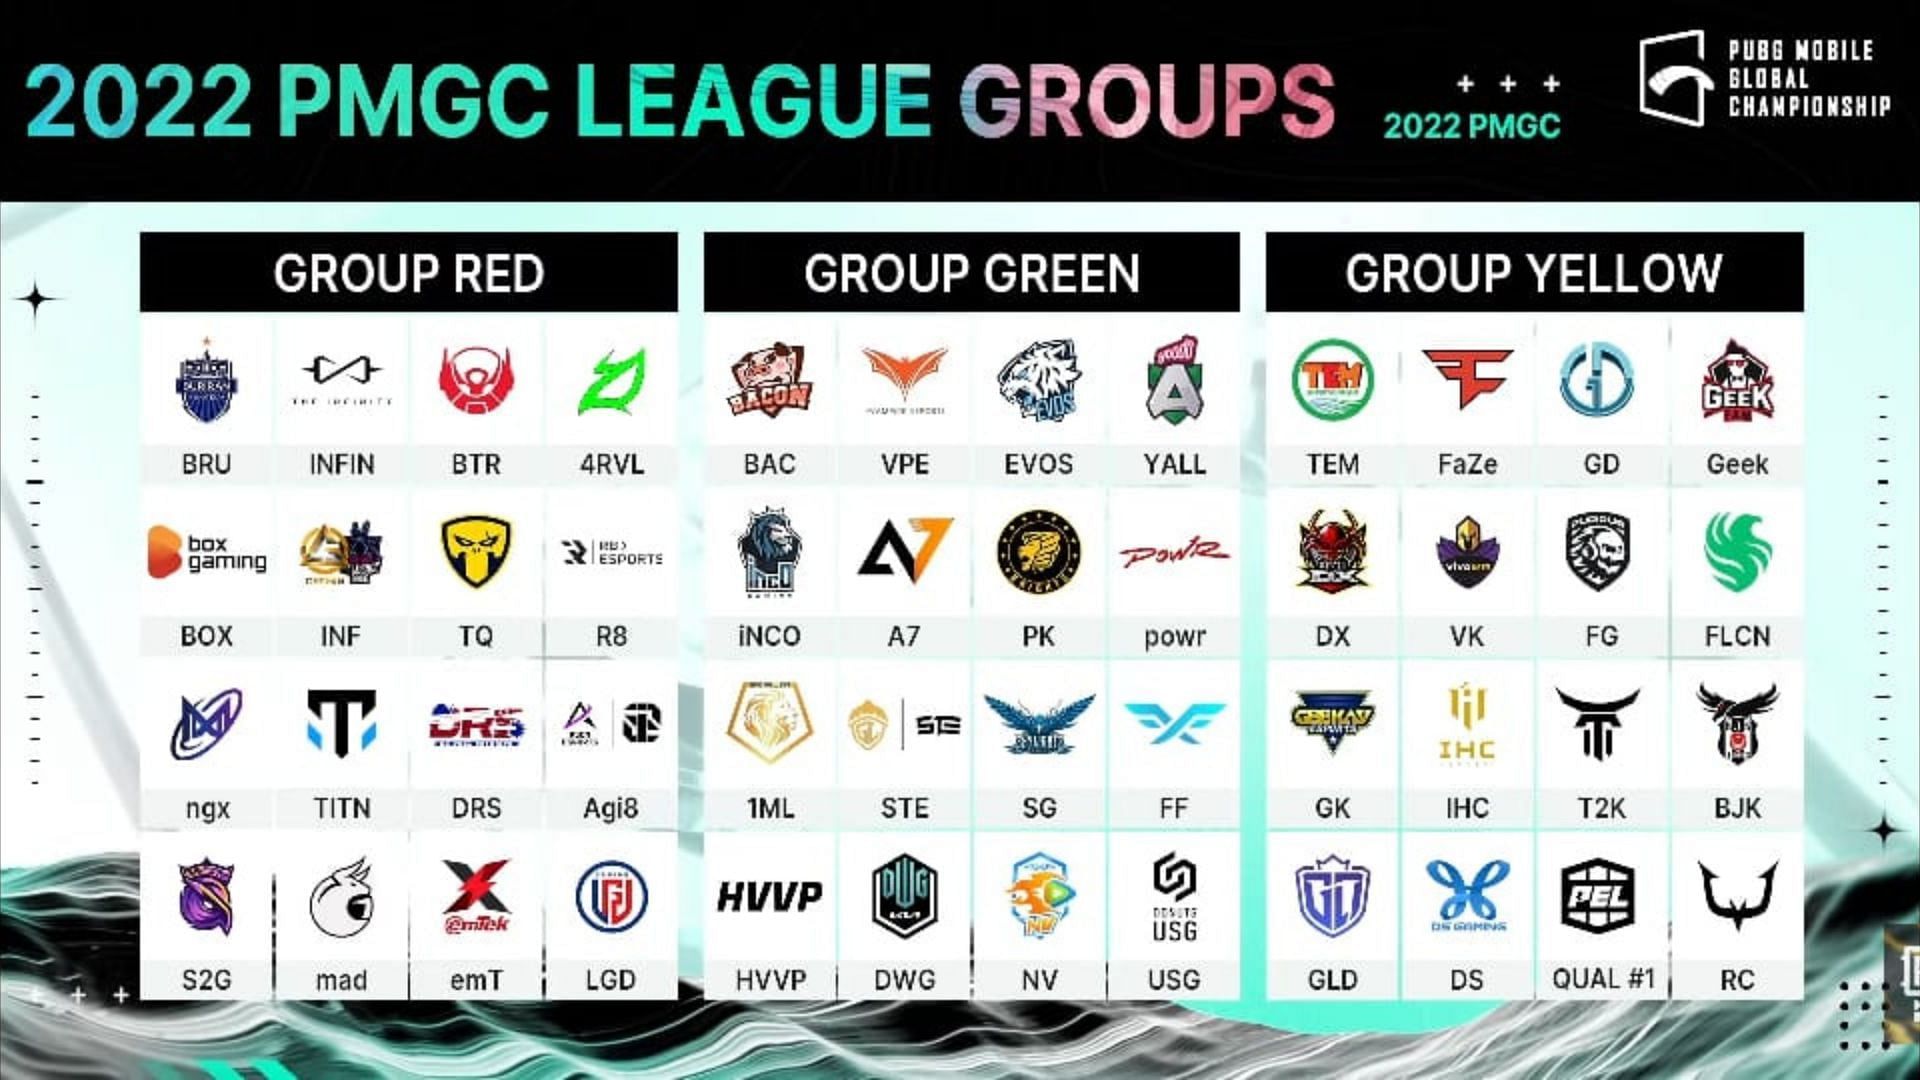 Group Red, Green, and Yellow teams. (image via PUBG Mobile)